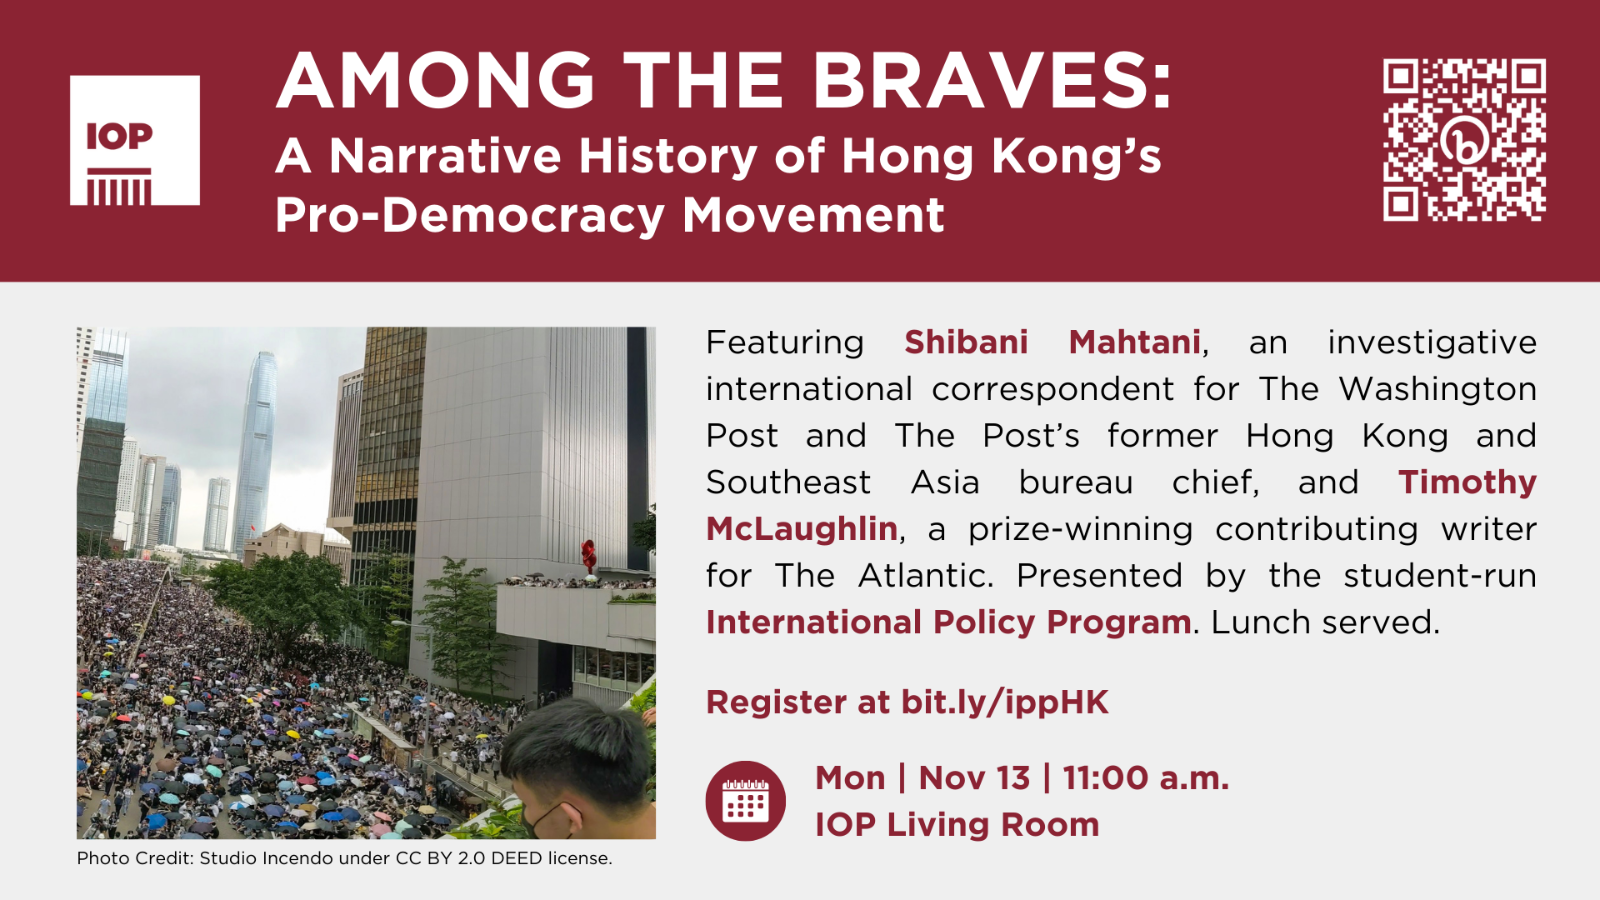 Poster Image for Among the Braves: A Narrative History of Hong Kong's Pro-Democracy Movement